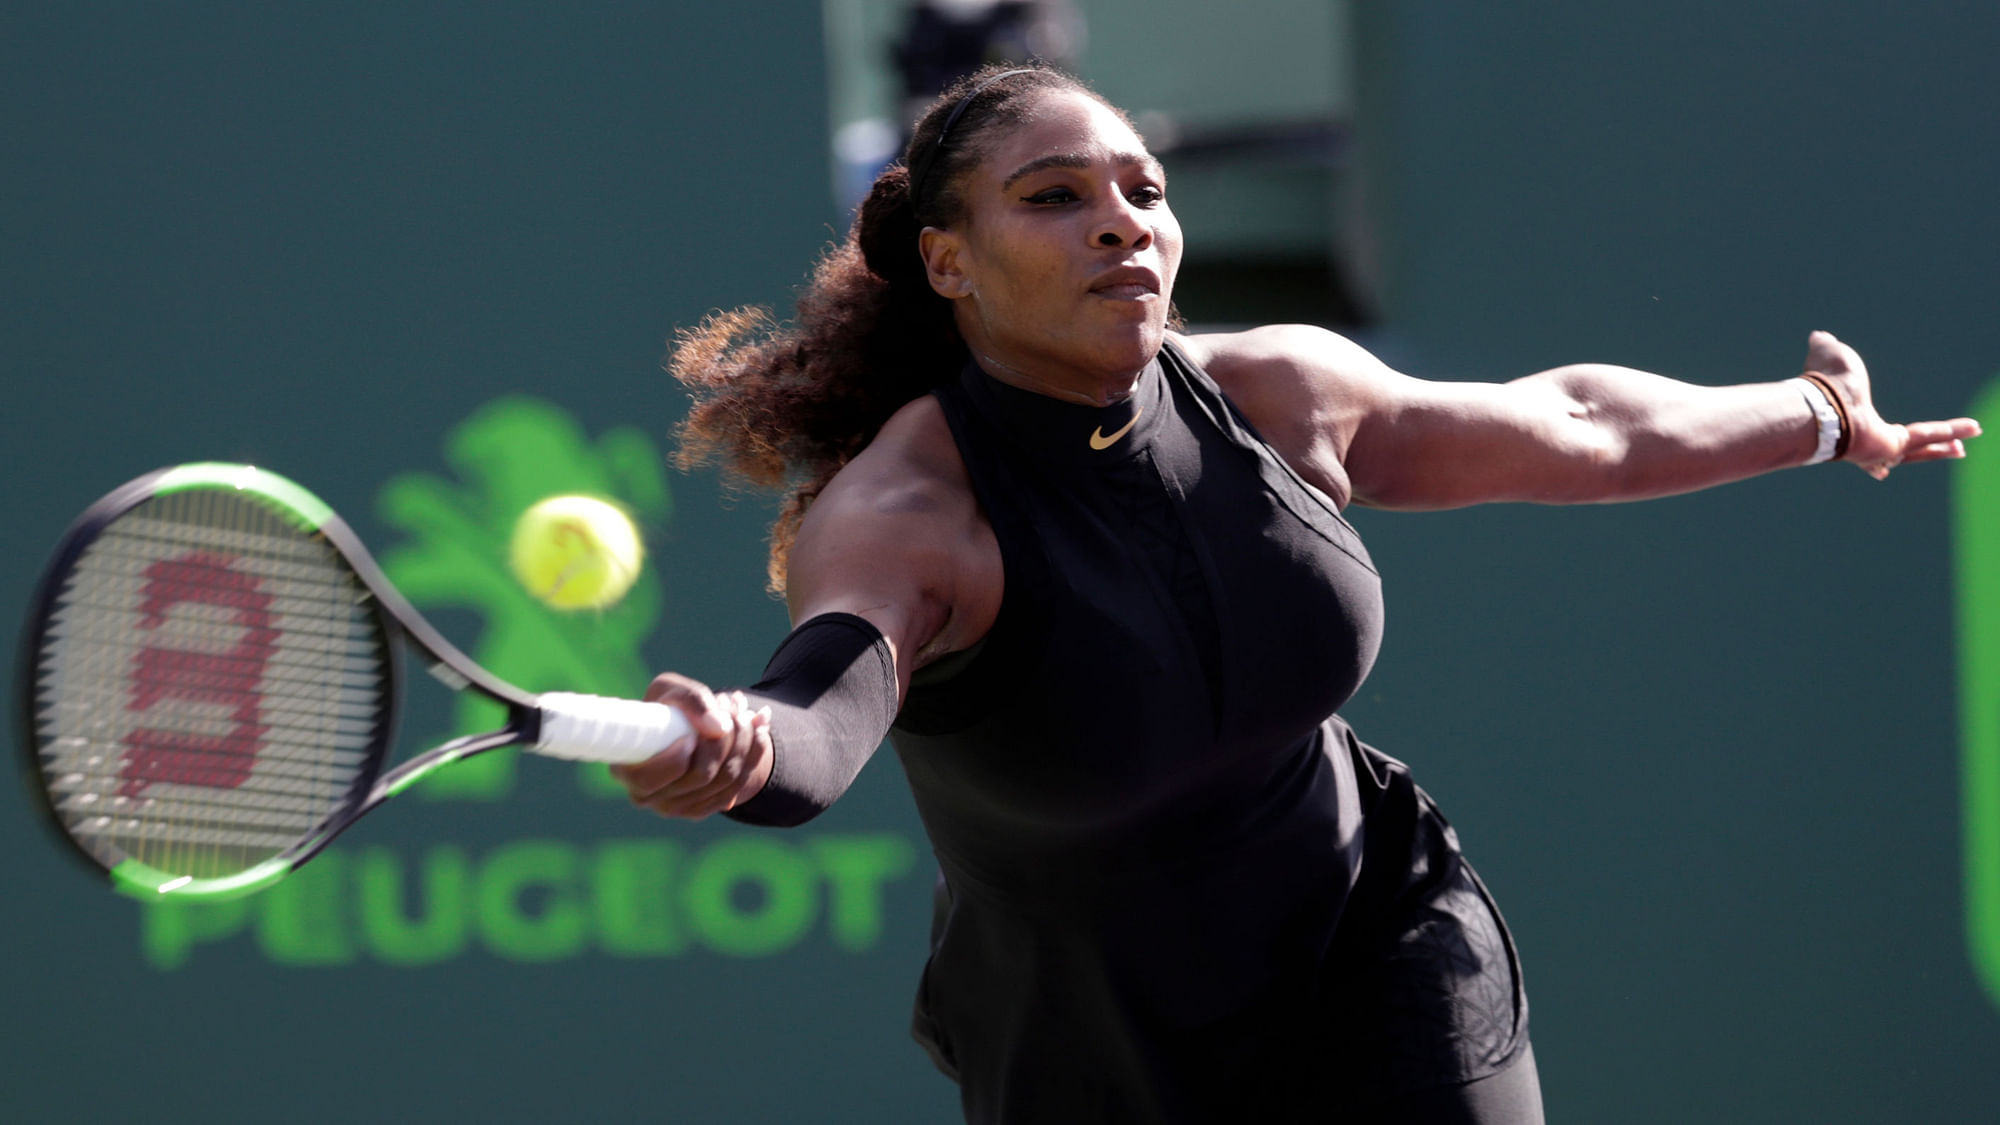 French Open organisers announced on Monday they will not give Serena Williams a seeding.